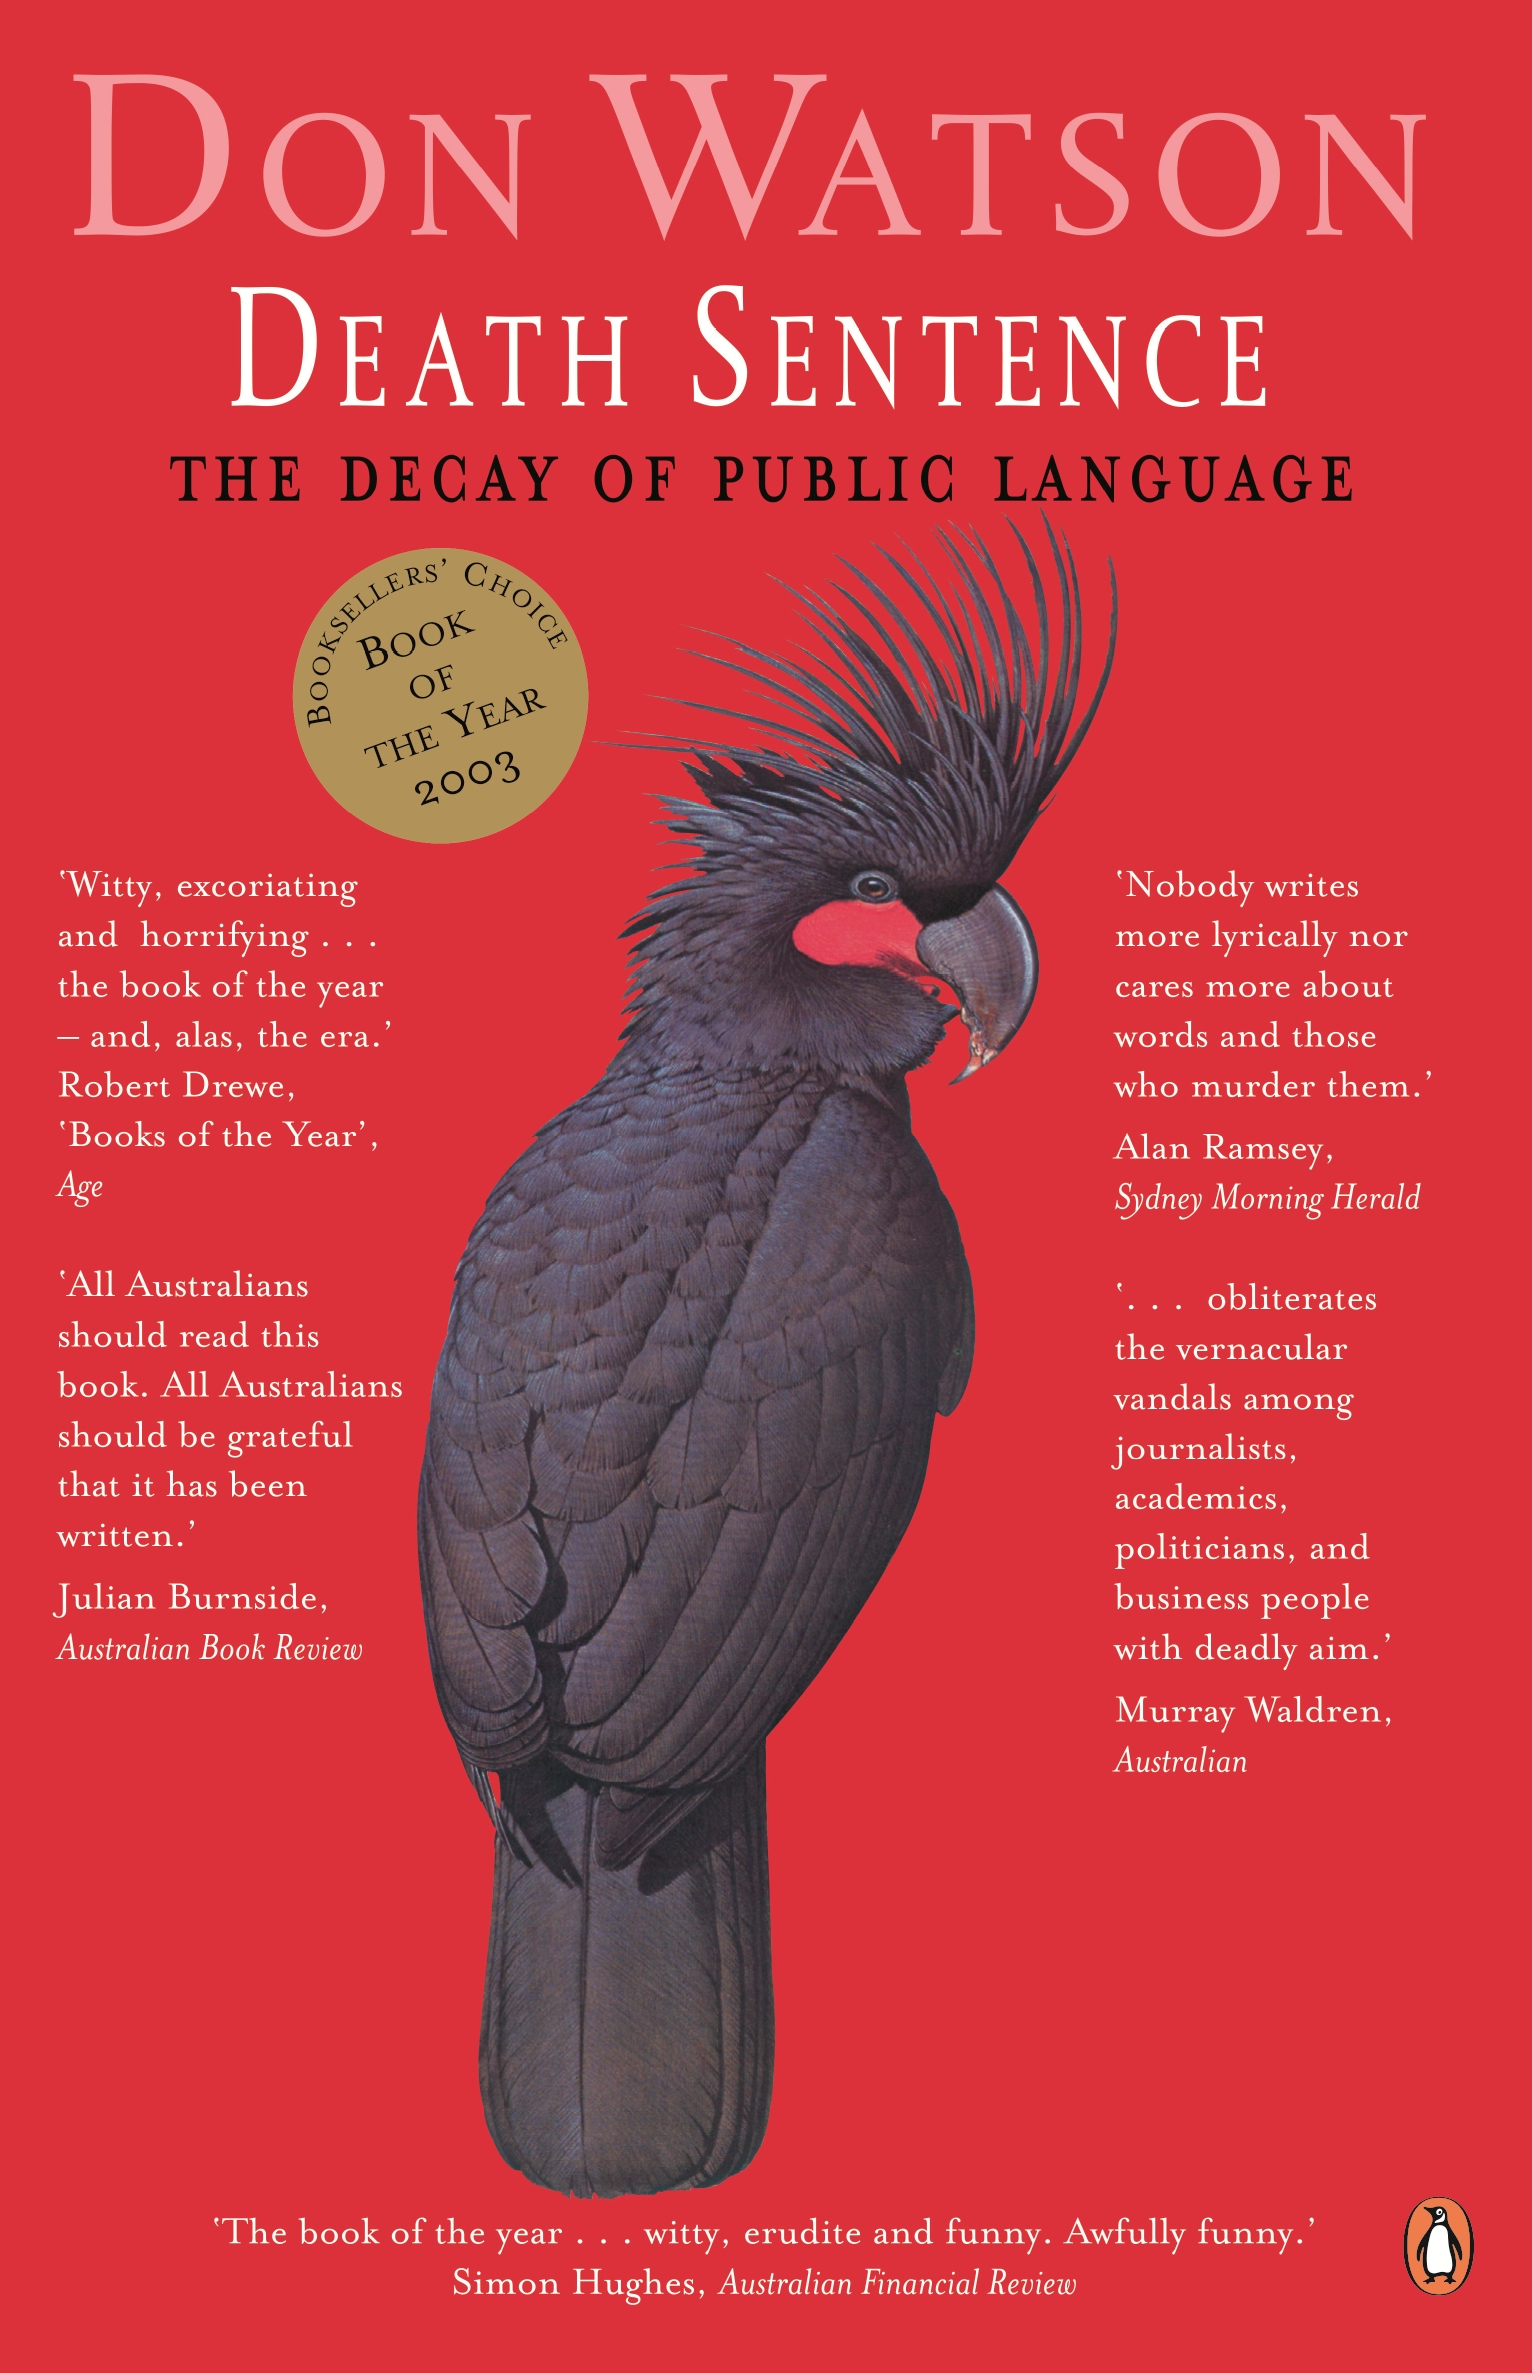 Death Sentence: The decay of public language